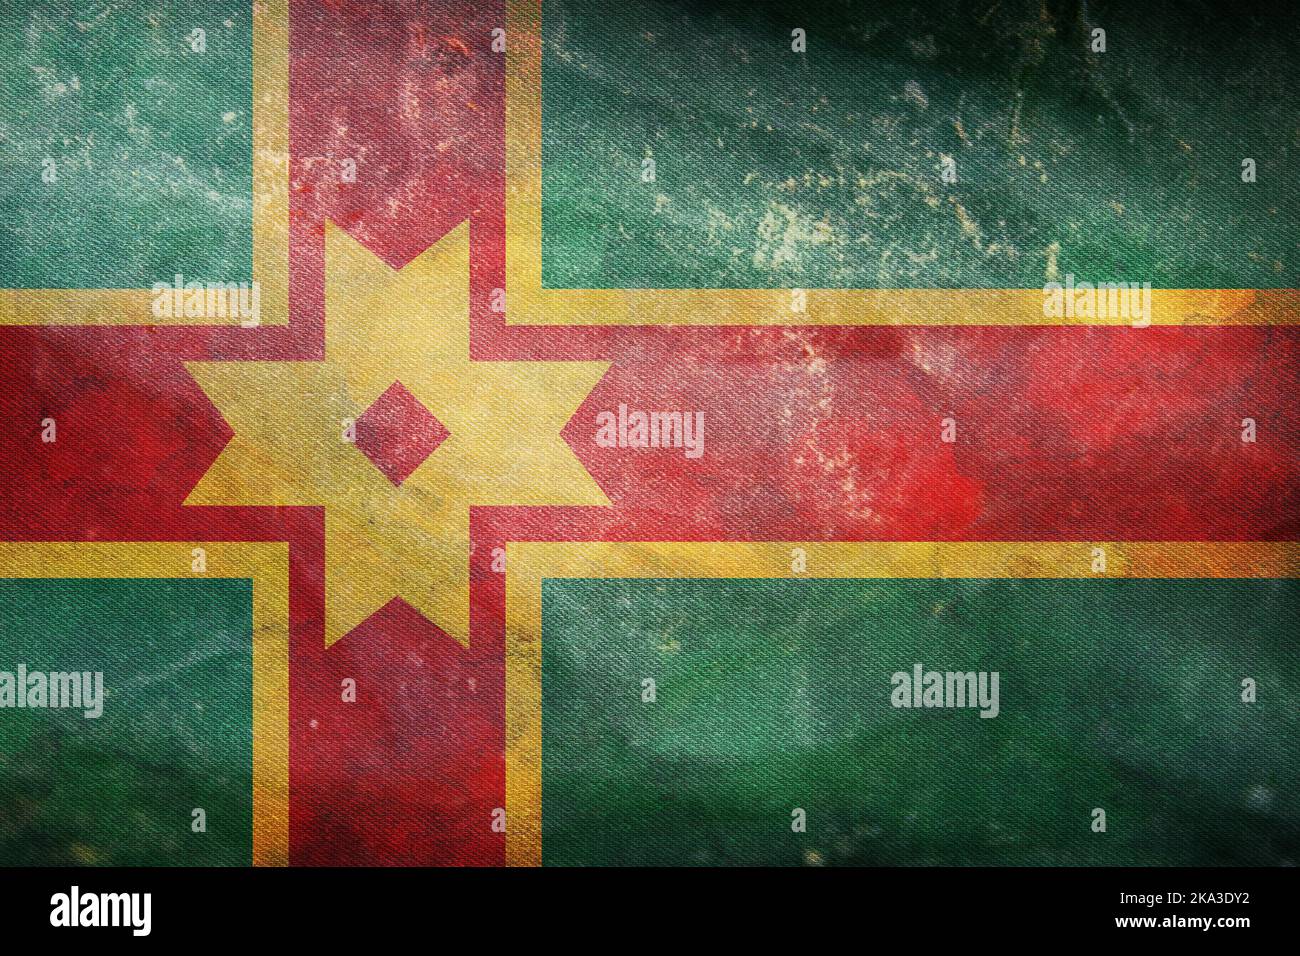 retro flag of Baltic Finns Tver Karelians with grunge texture. flag representing ethnic group or culture, regional authorities. no flagpole. Plane des Stock Photo